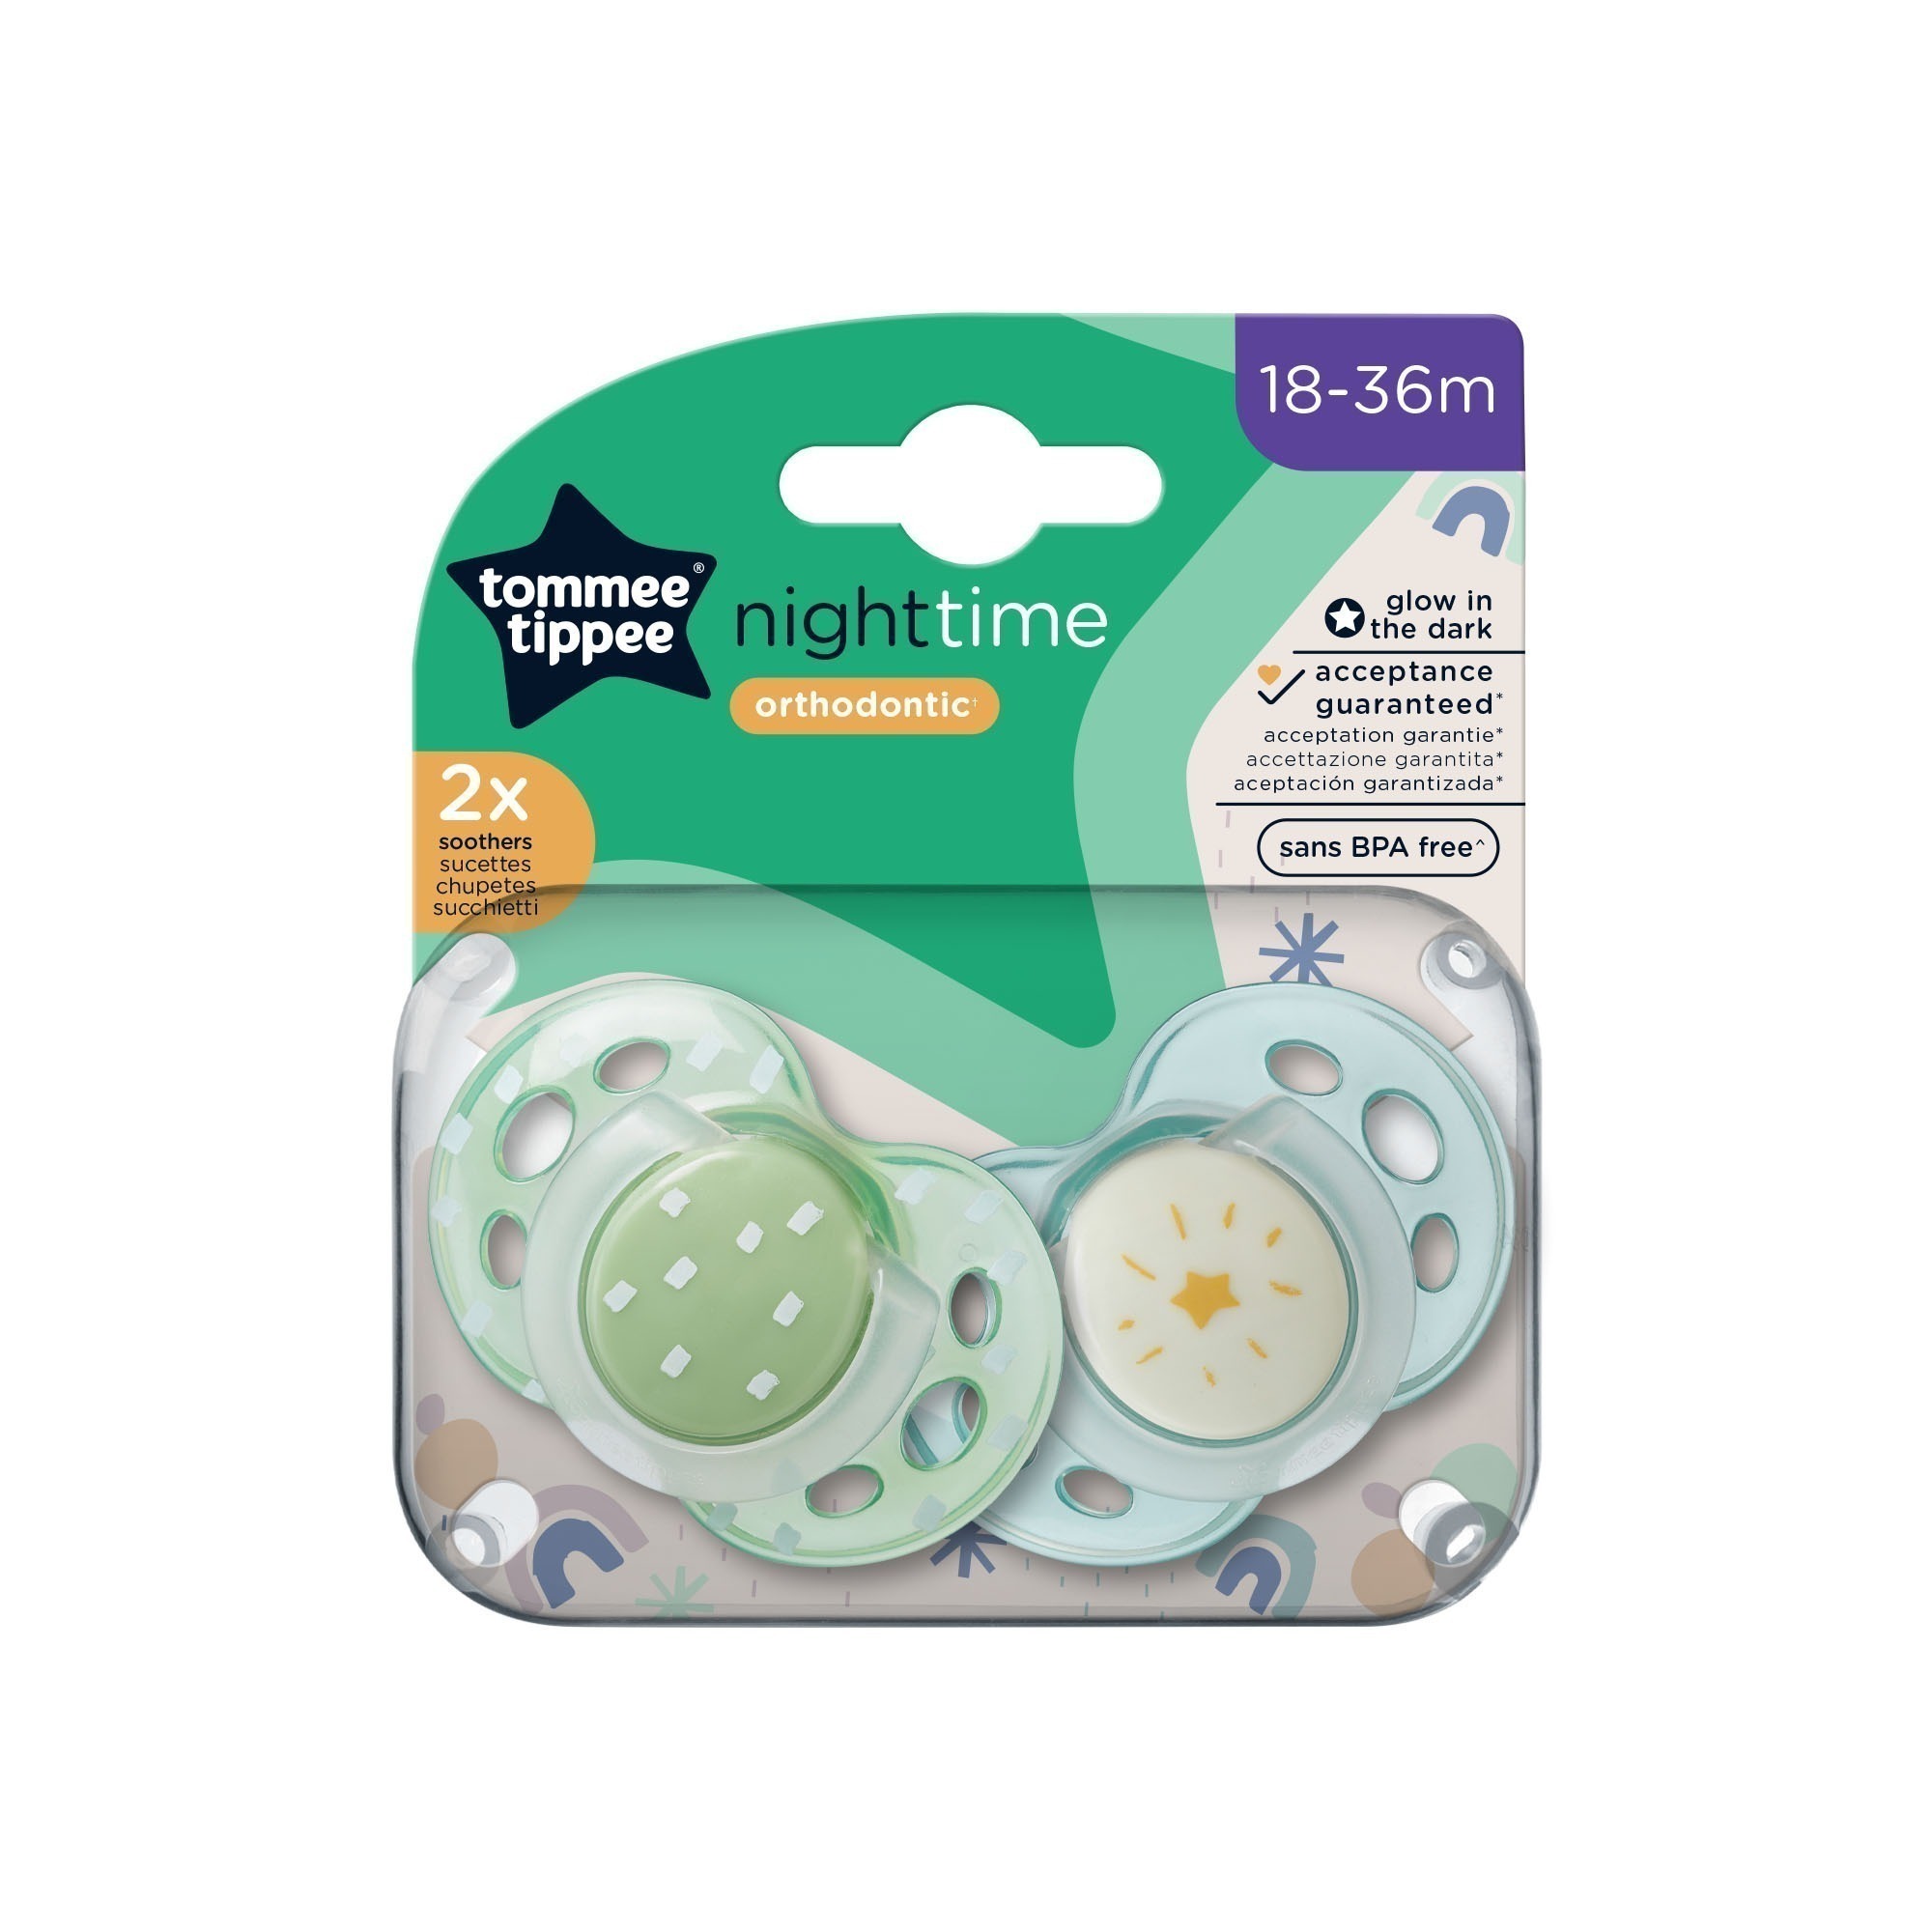 Chupete Nightime Tommee Tippee 0-6m/6-18m/18-36m Surtido